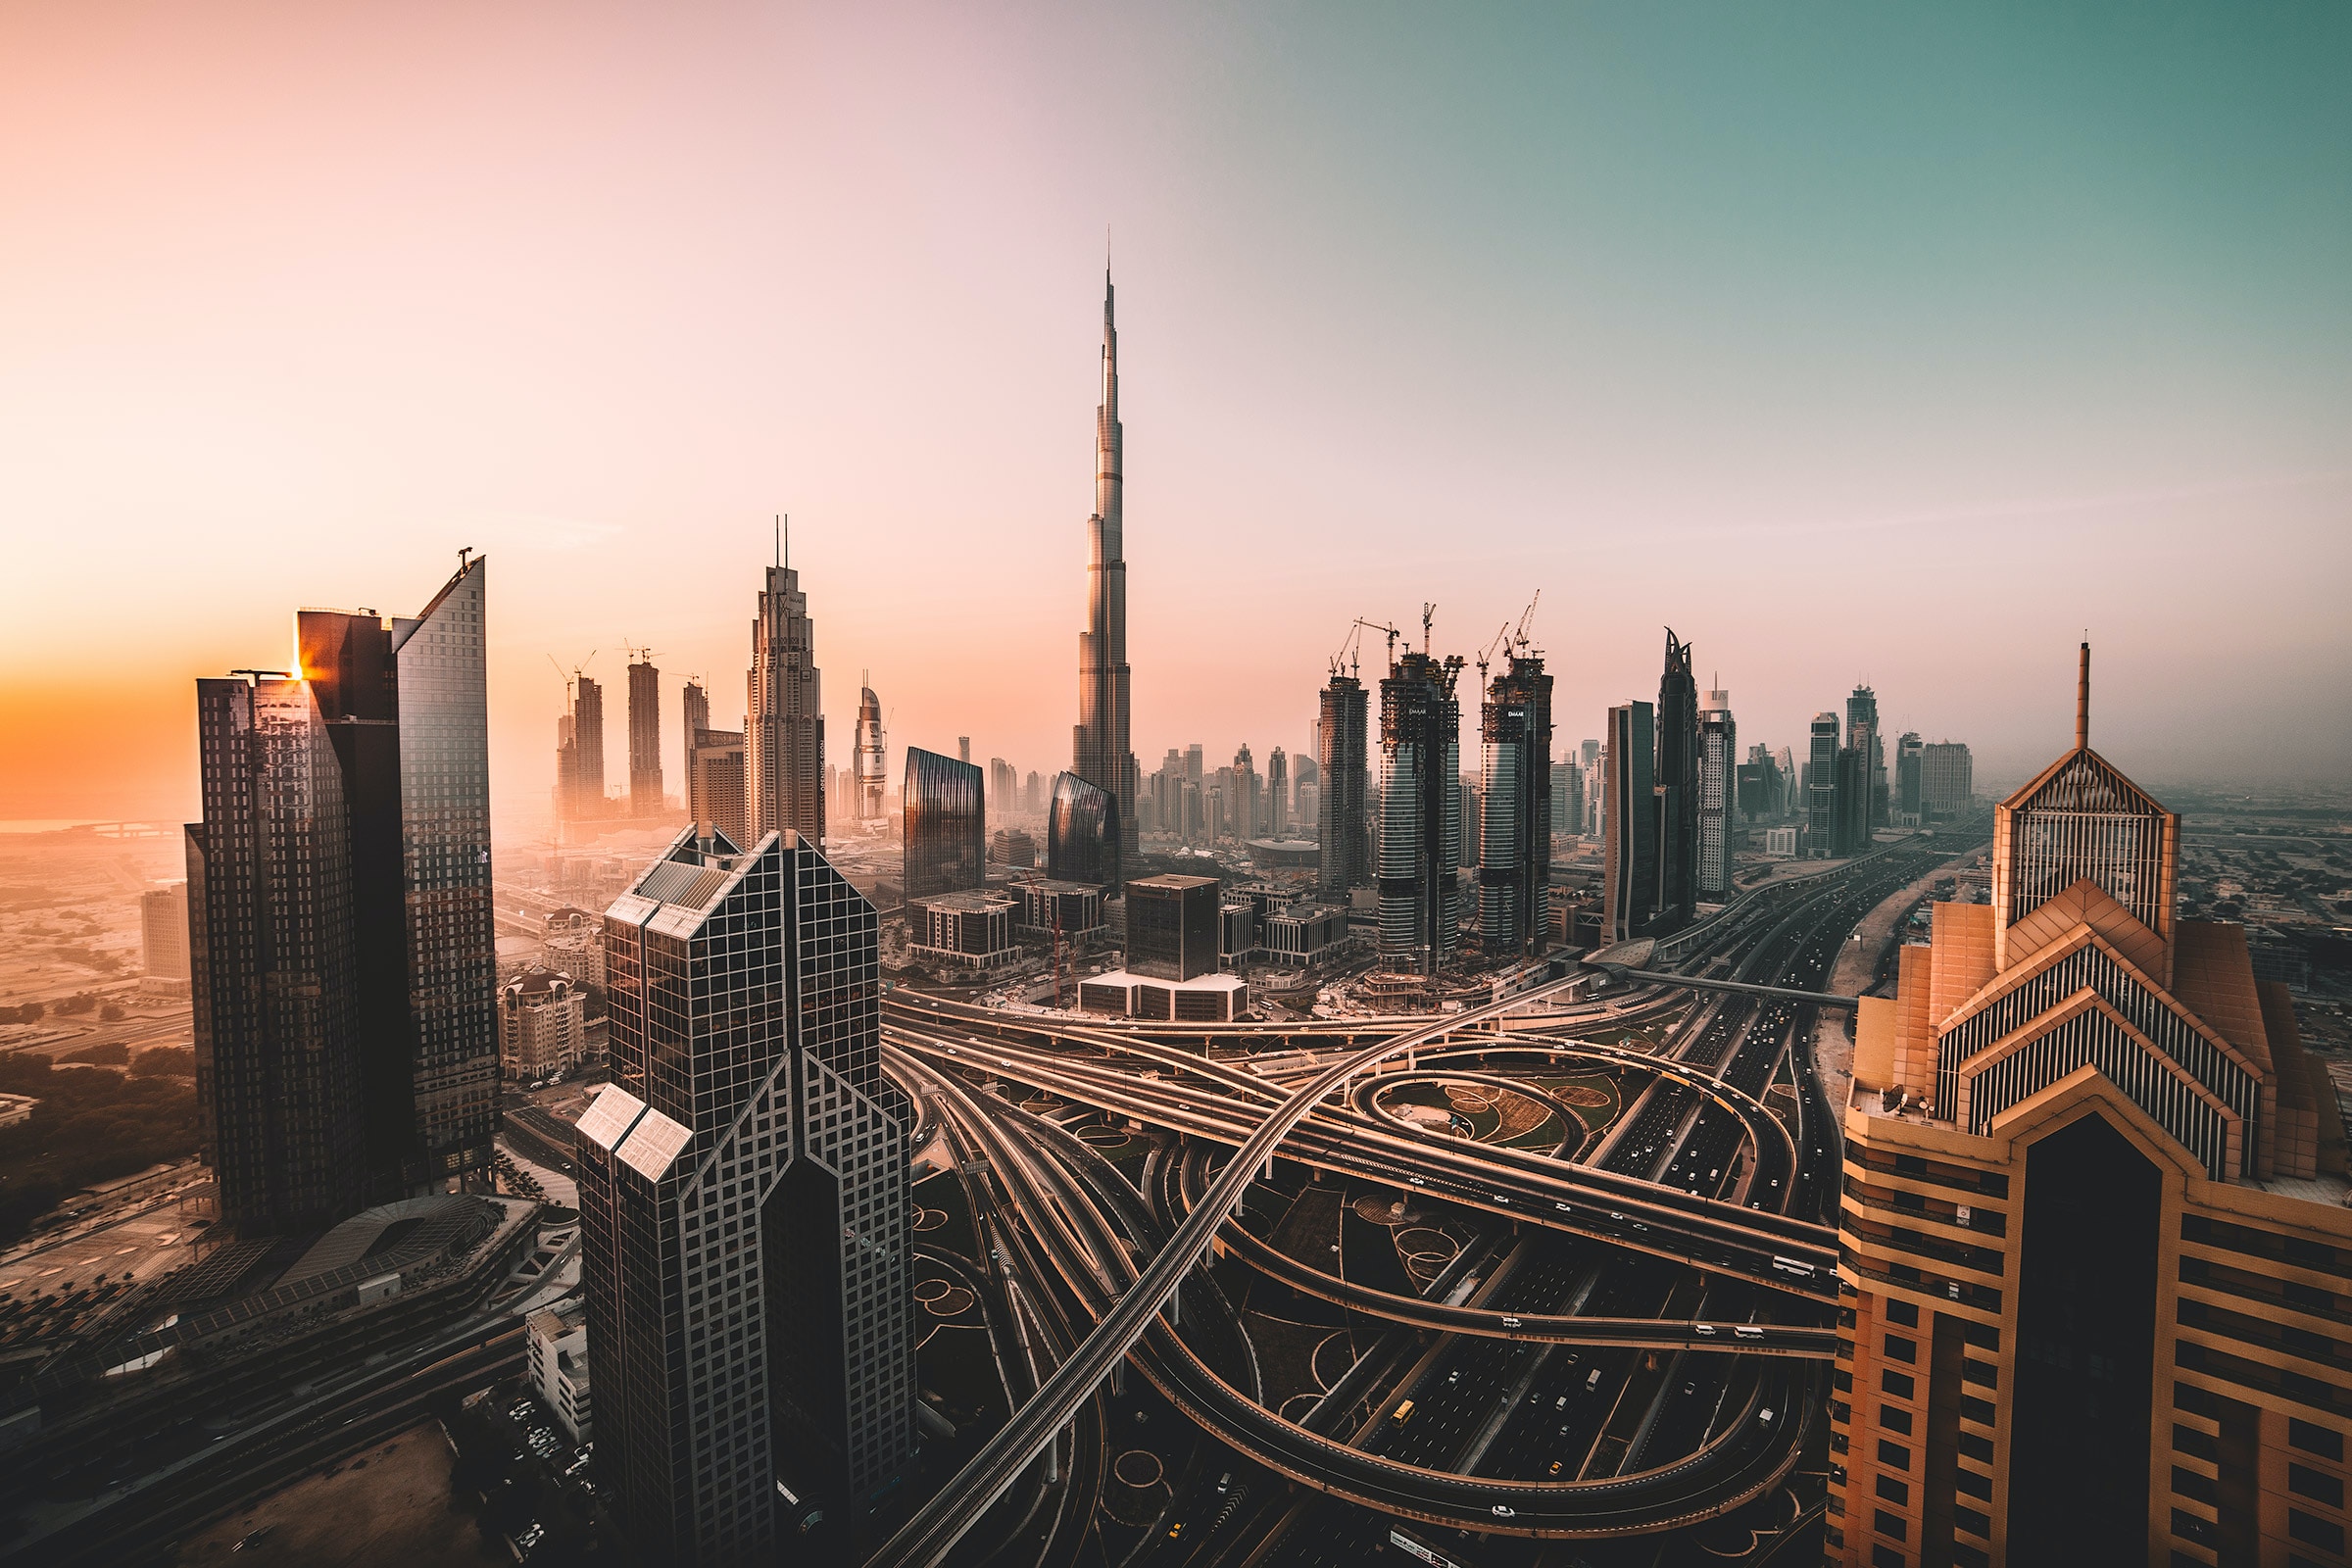 how to start own business in Dubai